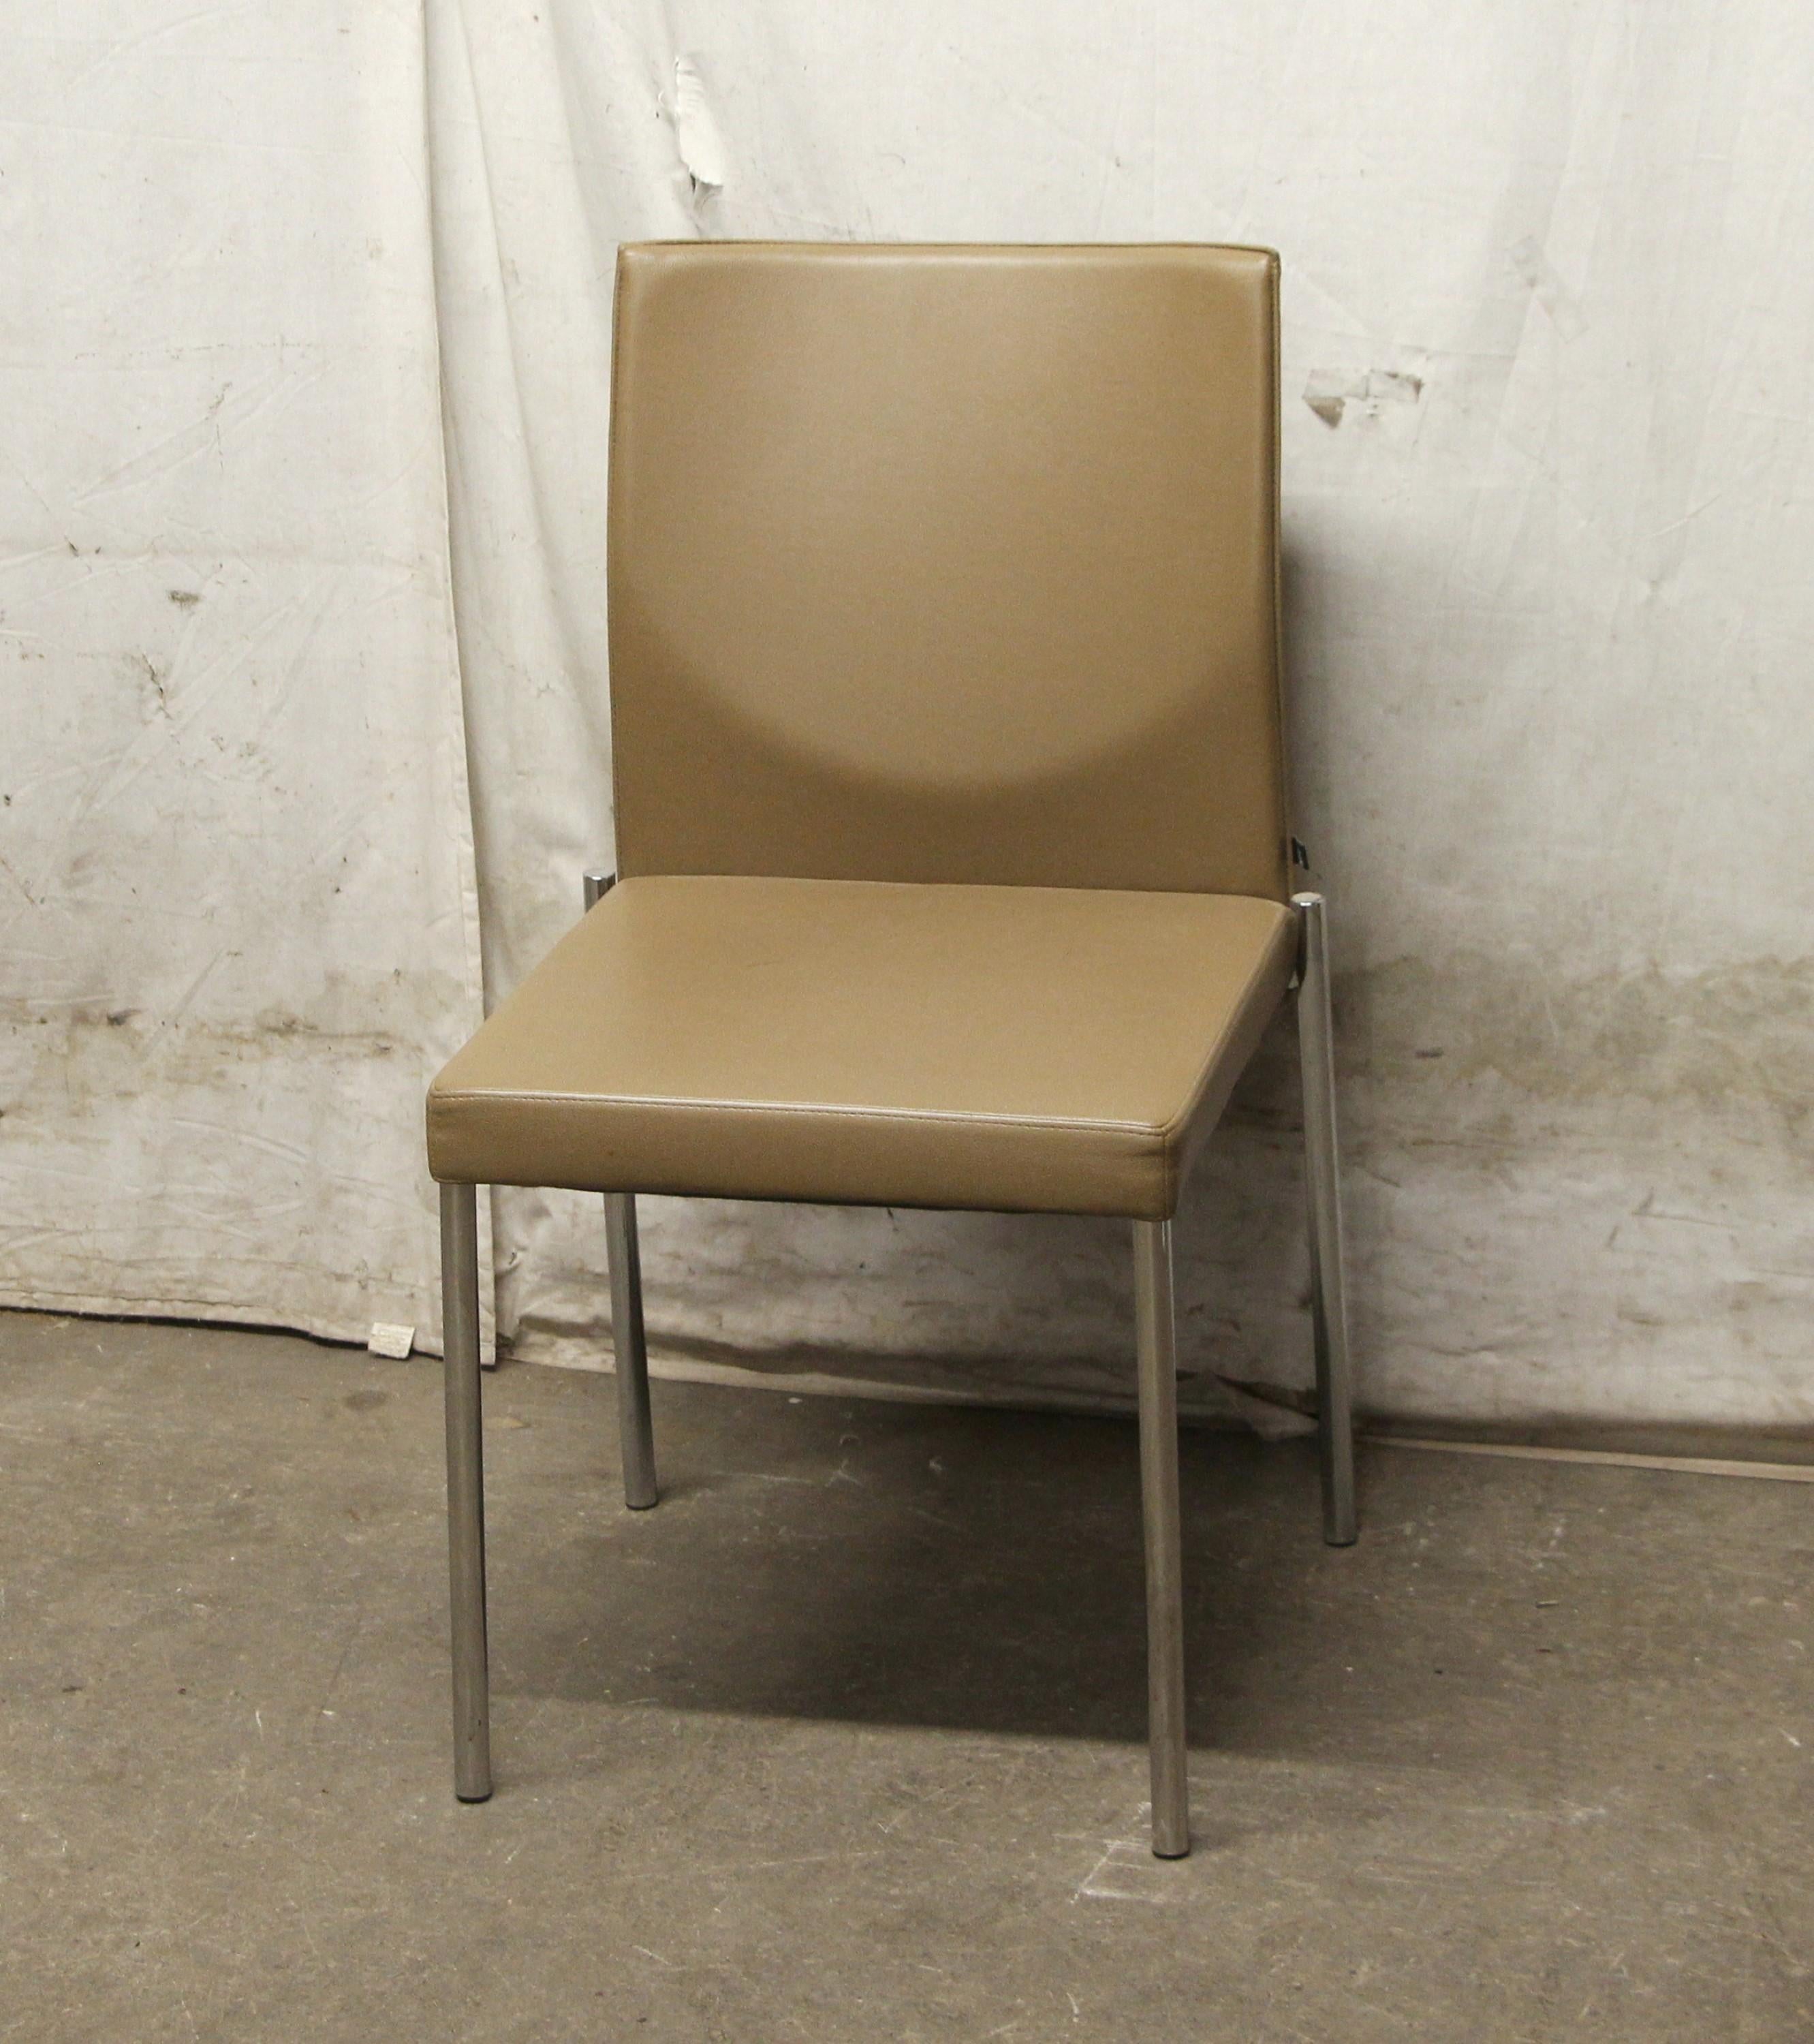 Glooh modern armless chair made by KFF (Karl-Friedrich Förster Design) with a sleek and comfortable design.  This German made chair, was originally used in a conference room setting.  It is light-weight and can also be in a dining or living room